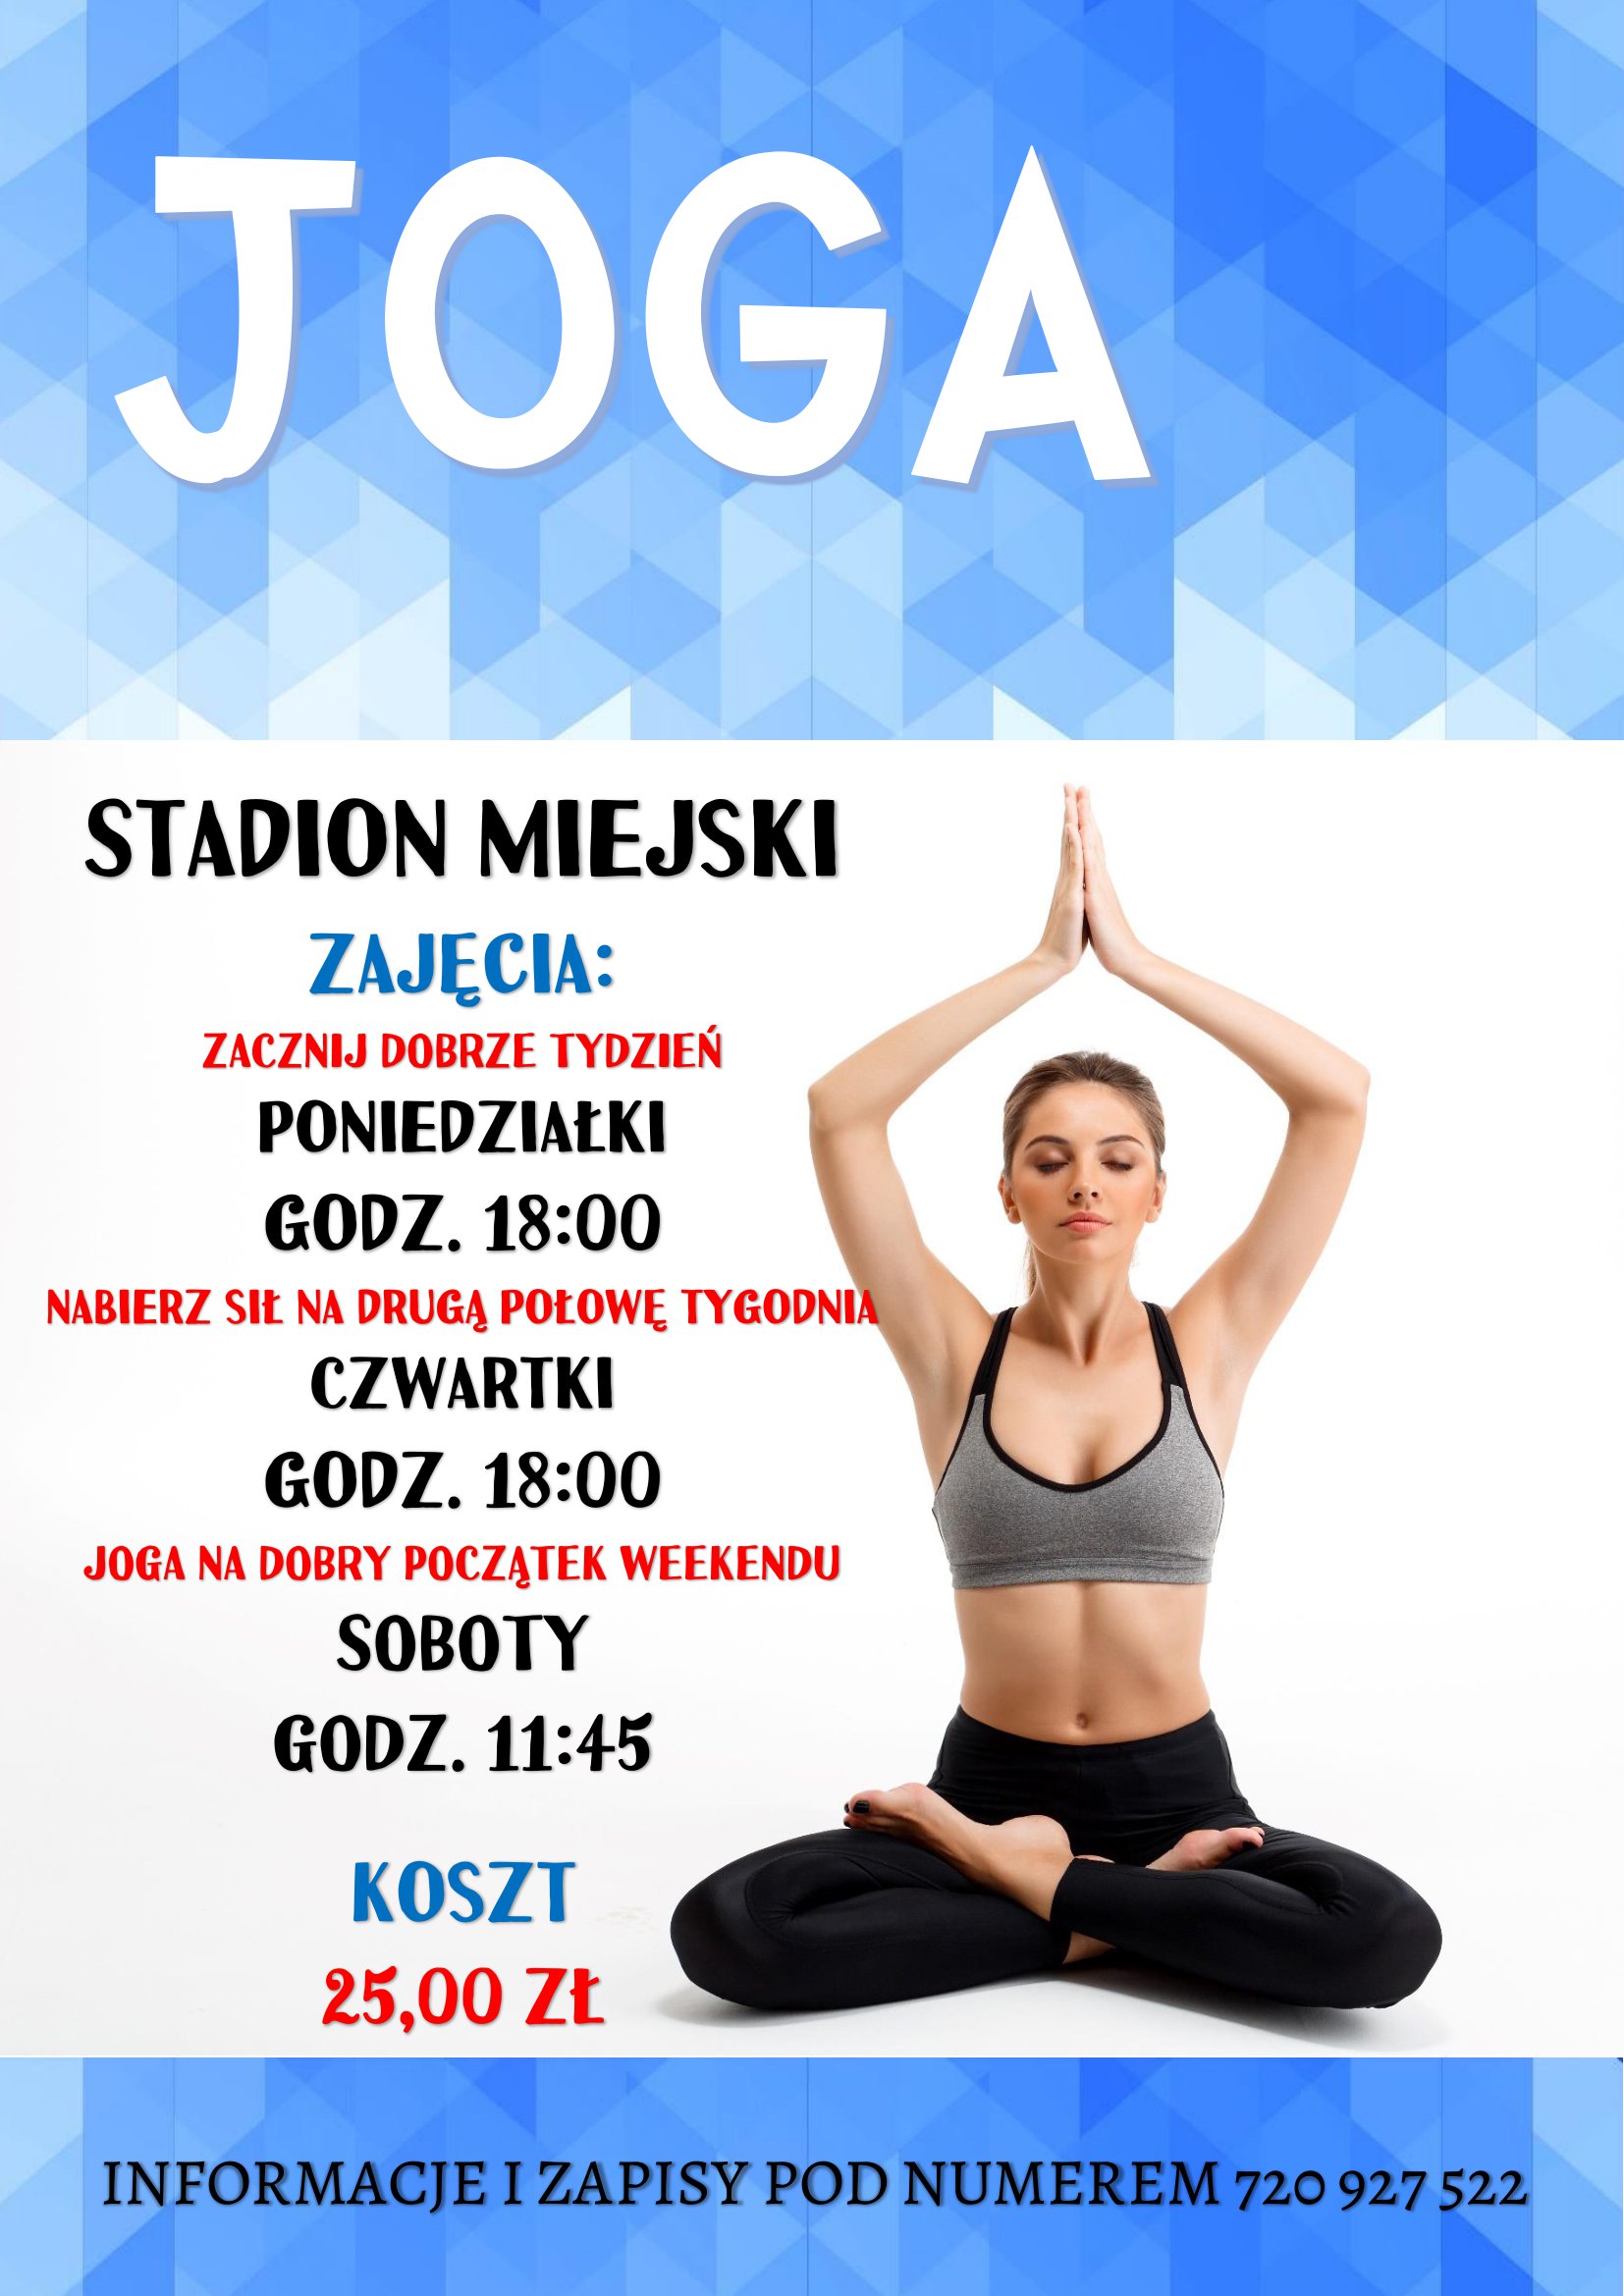 You are currently viewing Joga!